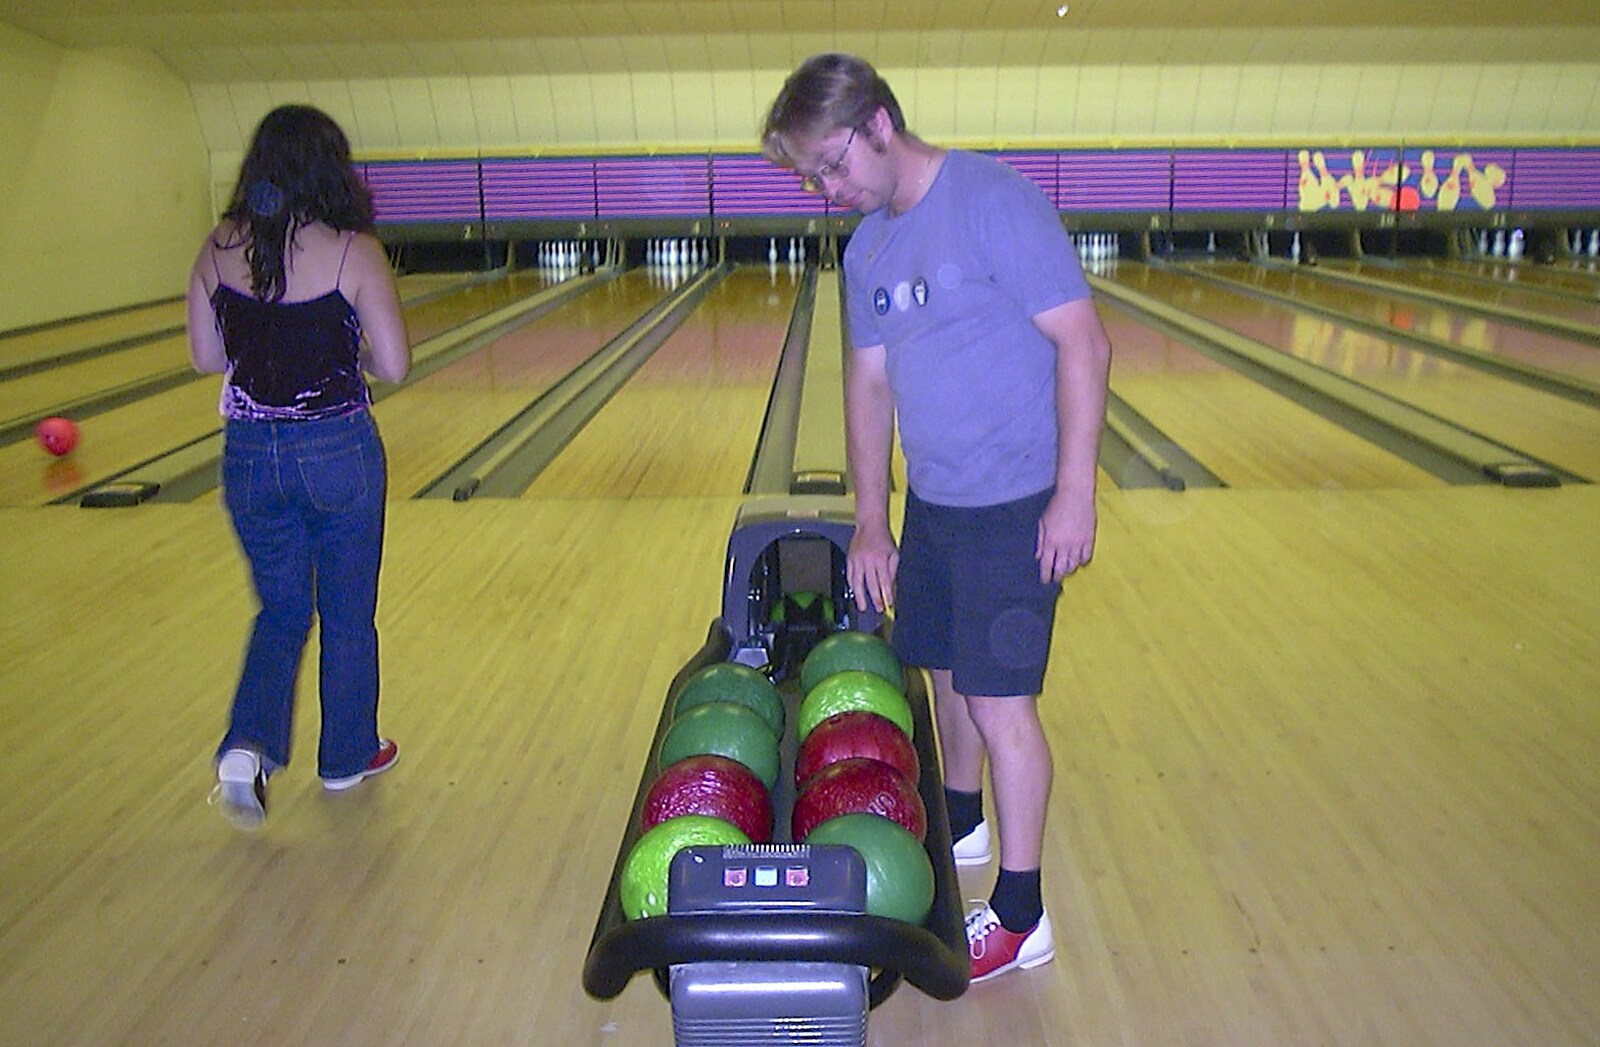 Marc considers a ball from Ten Pin Bowling, Norwich, Norfolk - 13th September 2003